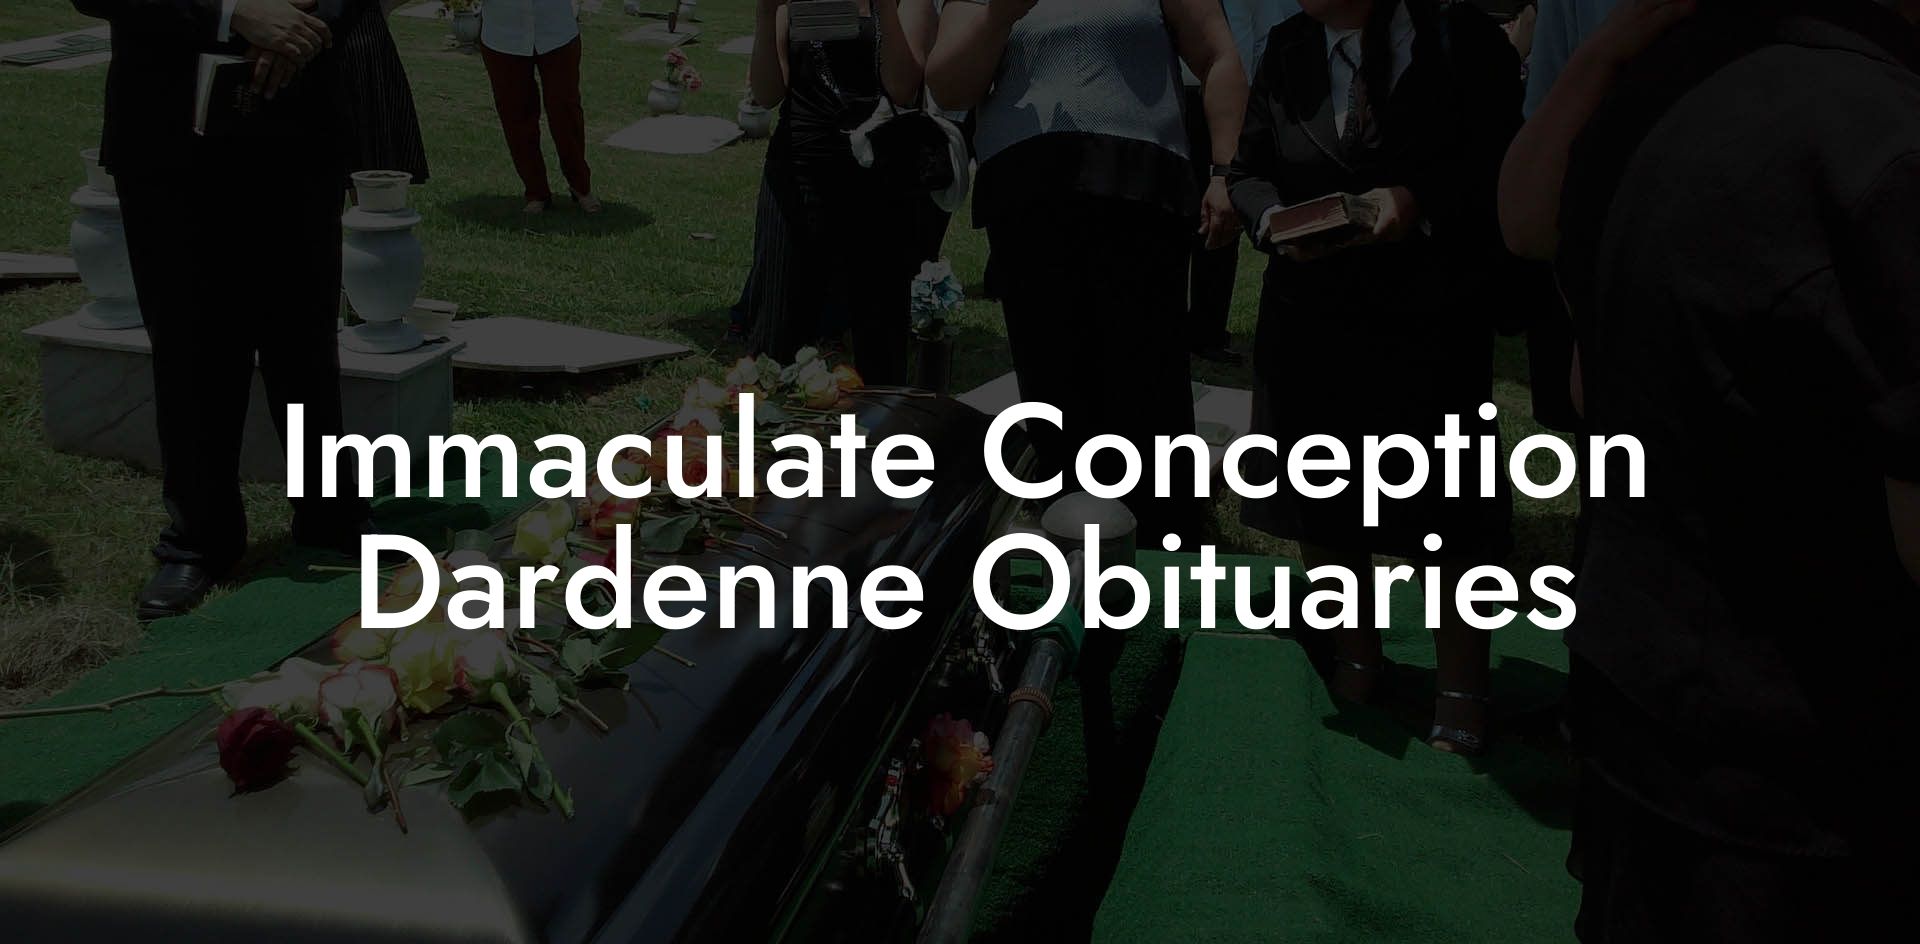 Immaculate Conception Dardenne Obituaries